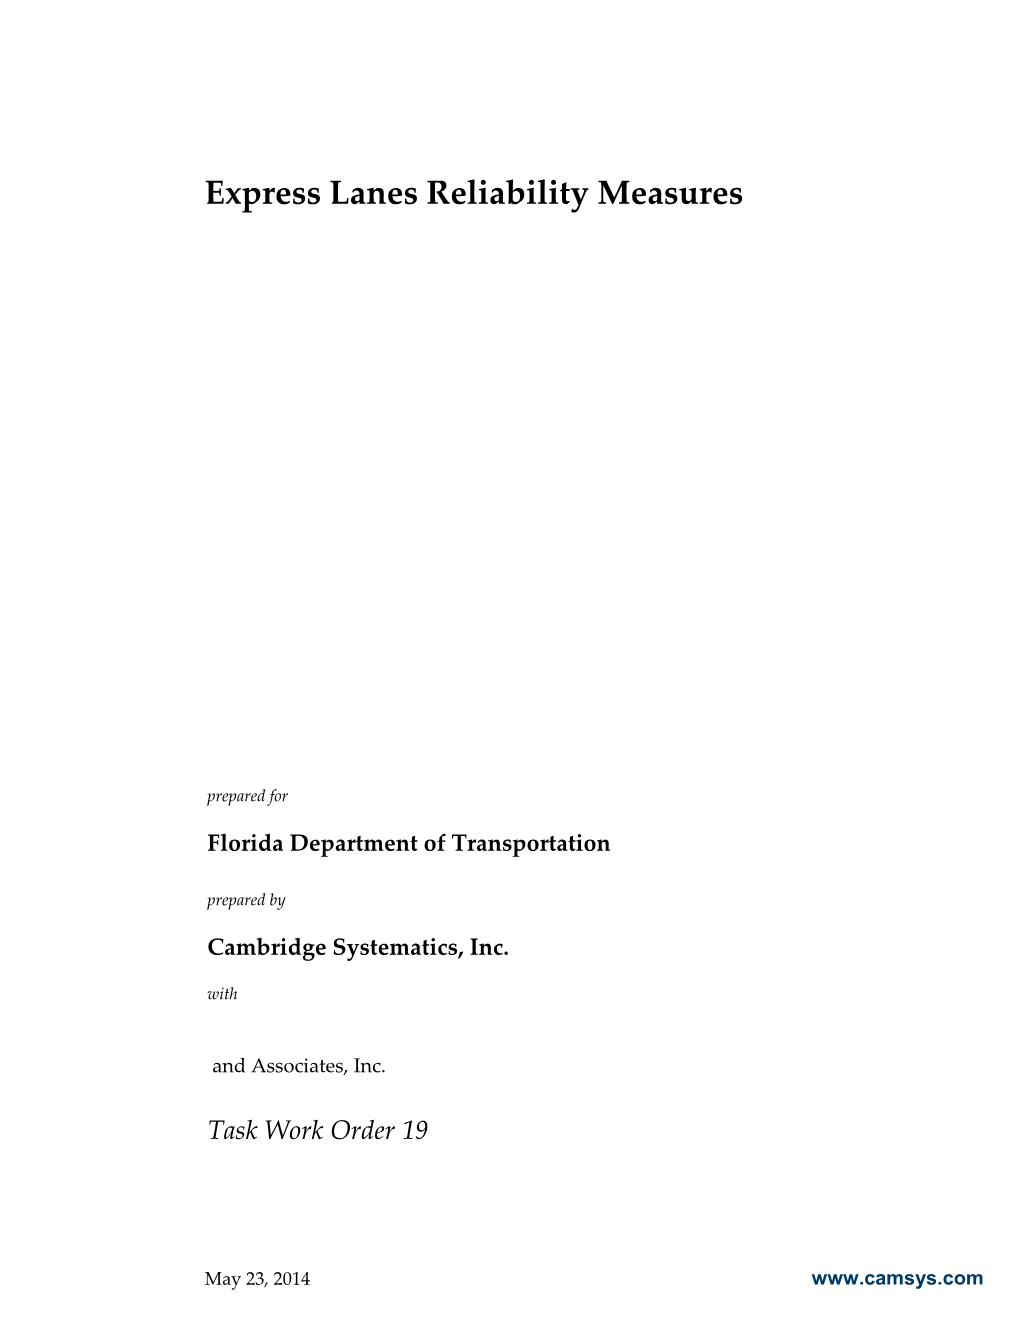 Express Lanes Reliability Measures